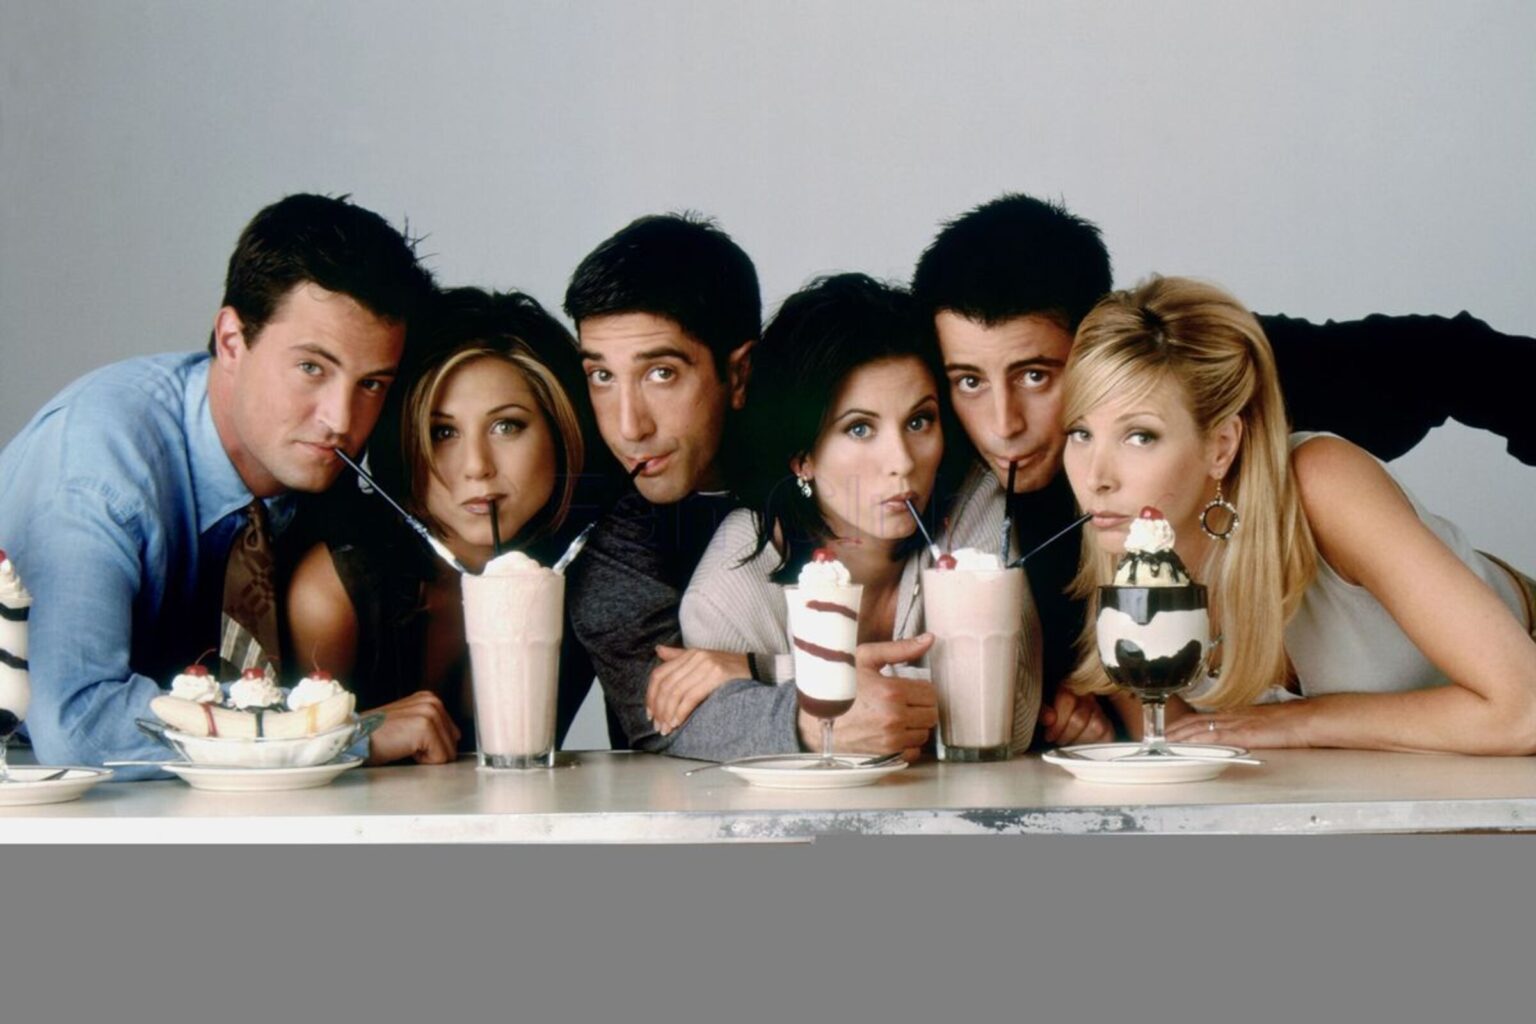 The iconic NBC sitcom 'Friends' has been teasing an HBO Max reunion for months now, but it looks like it's finally making its way into production.